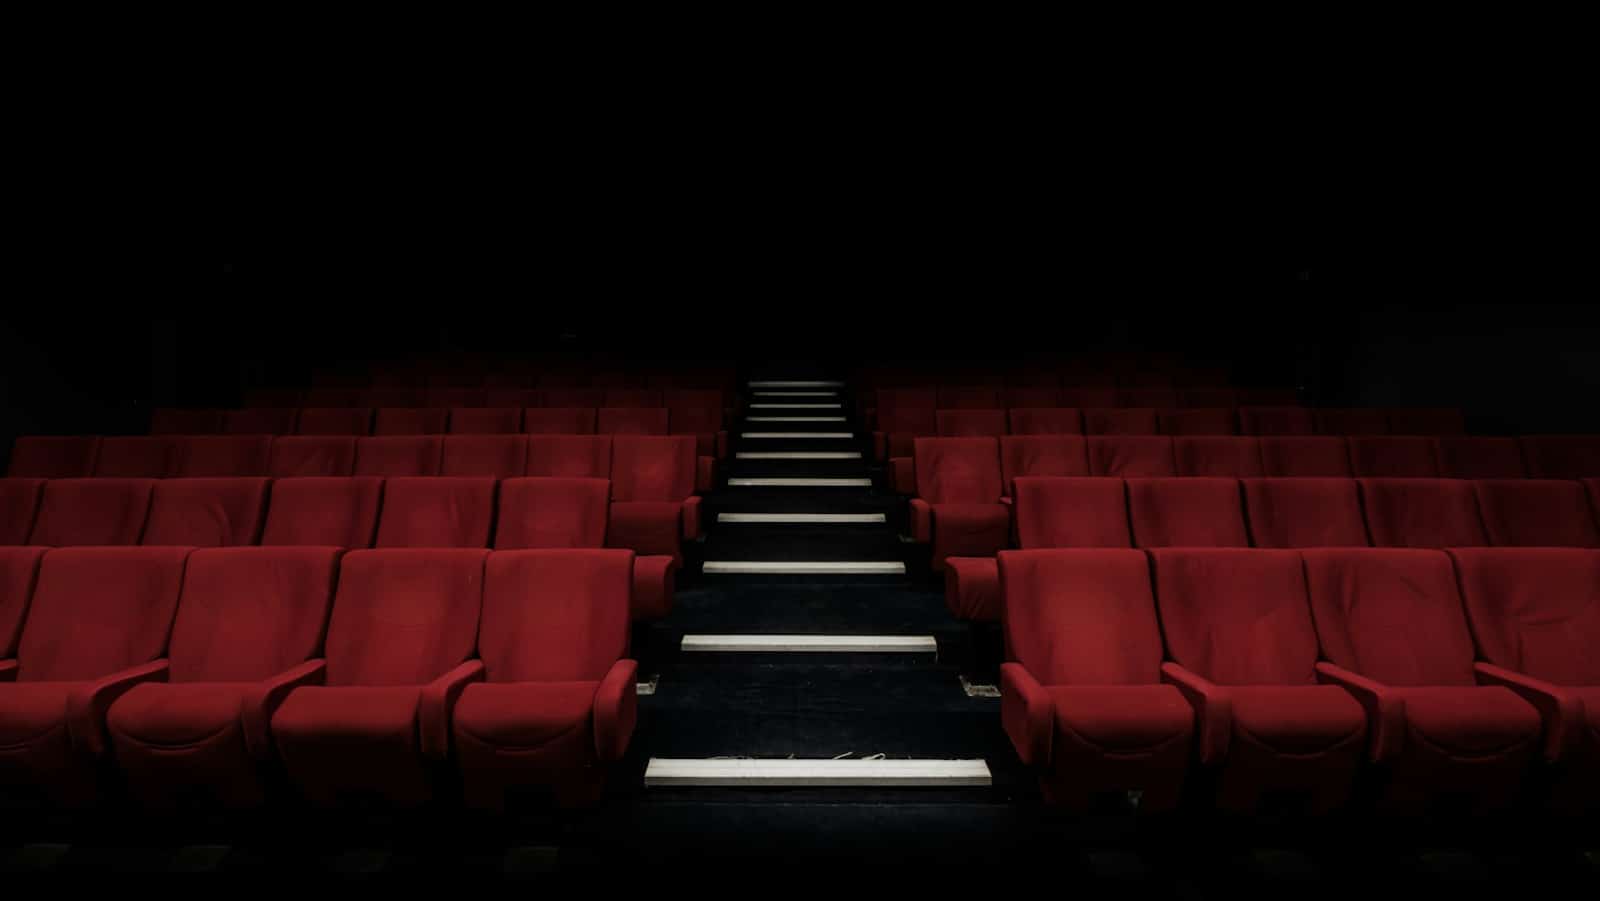 empty movie theater illustration for horror movie title article